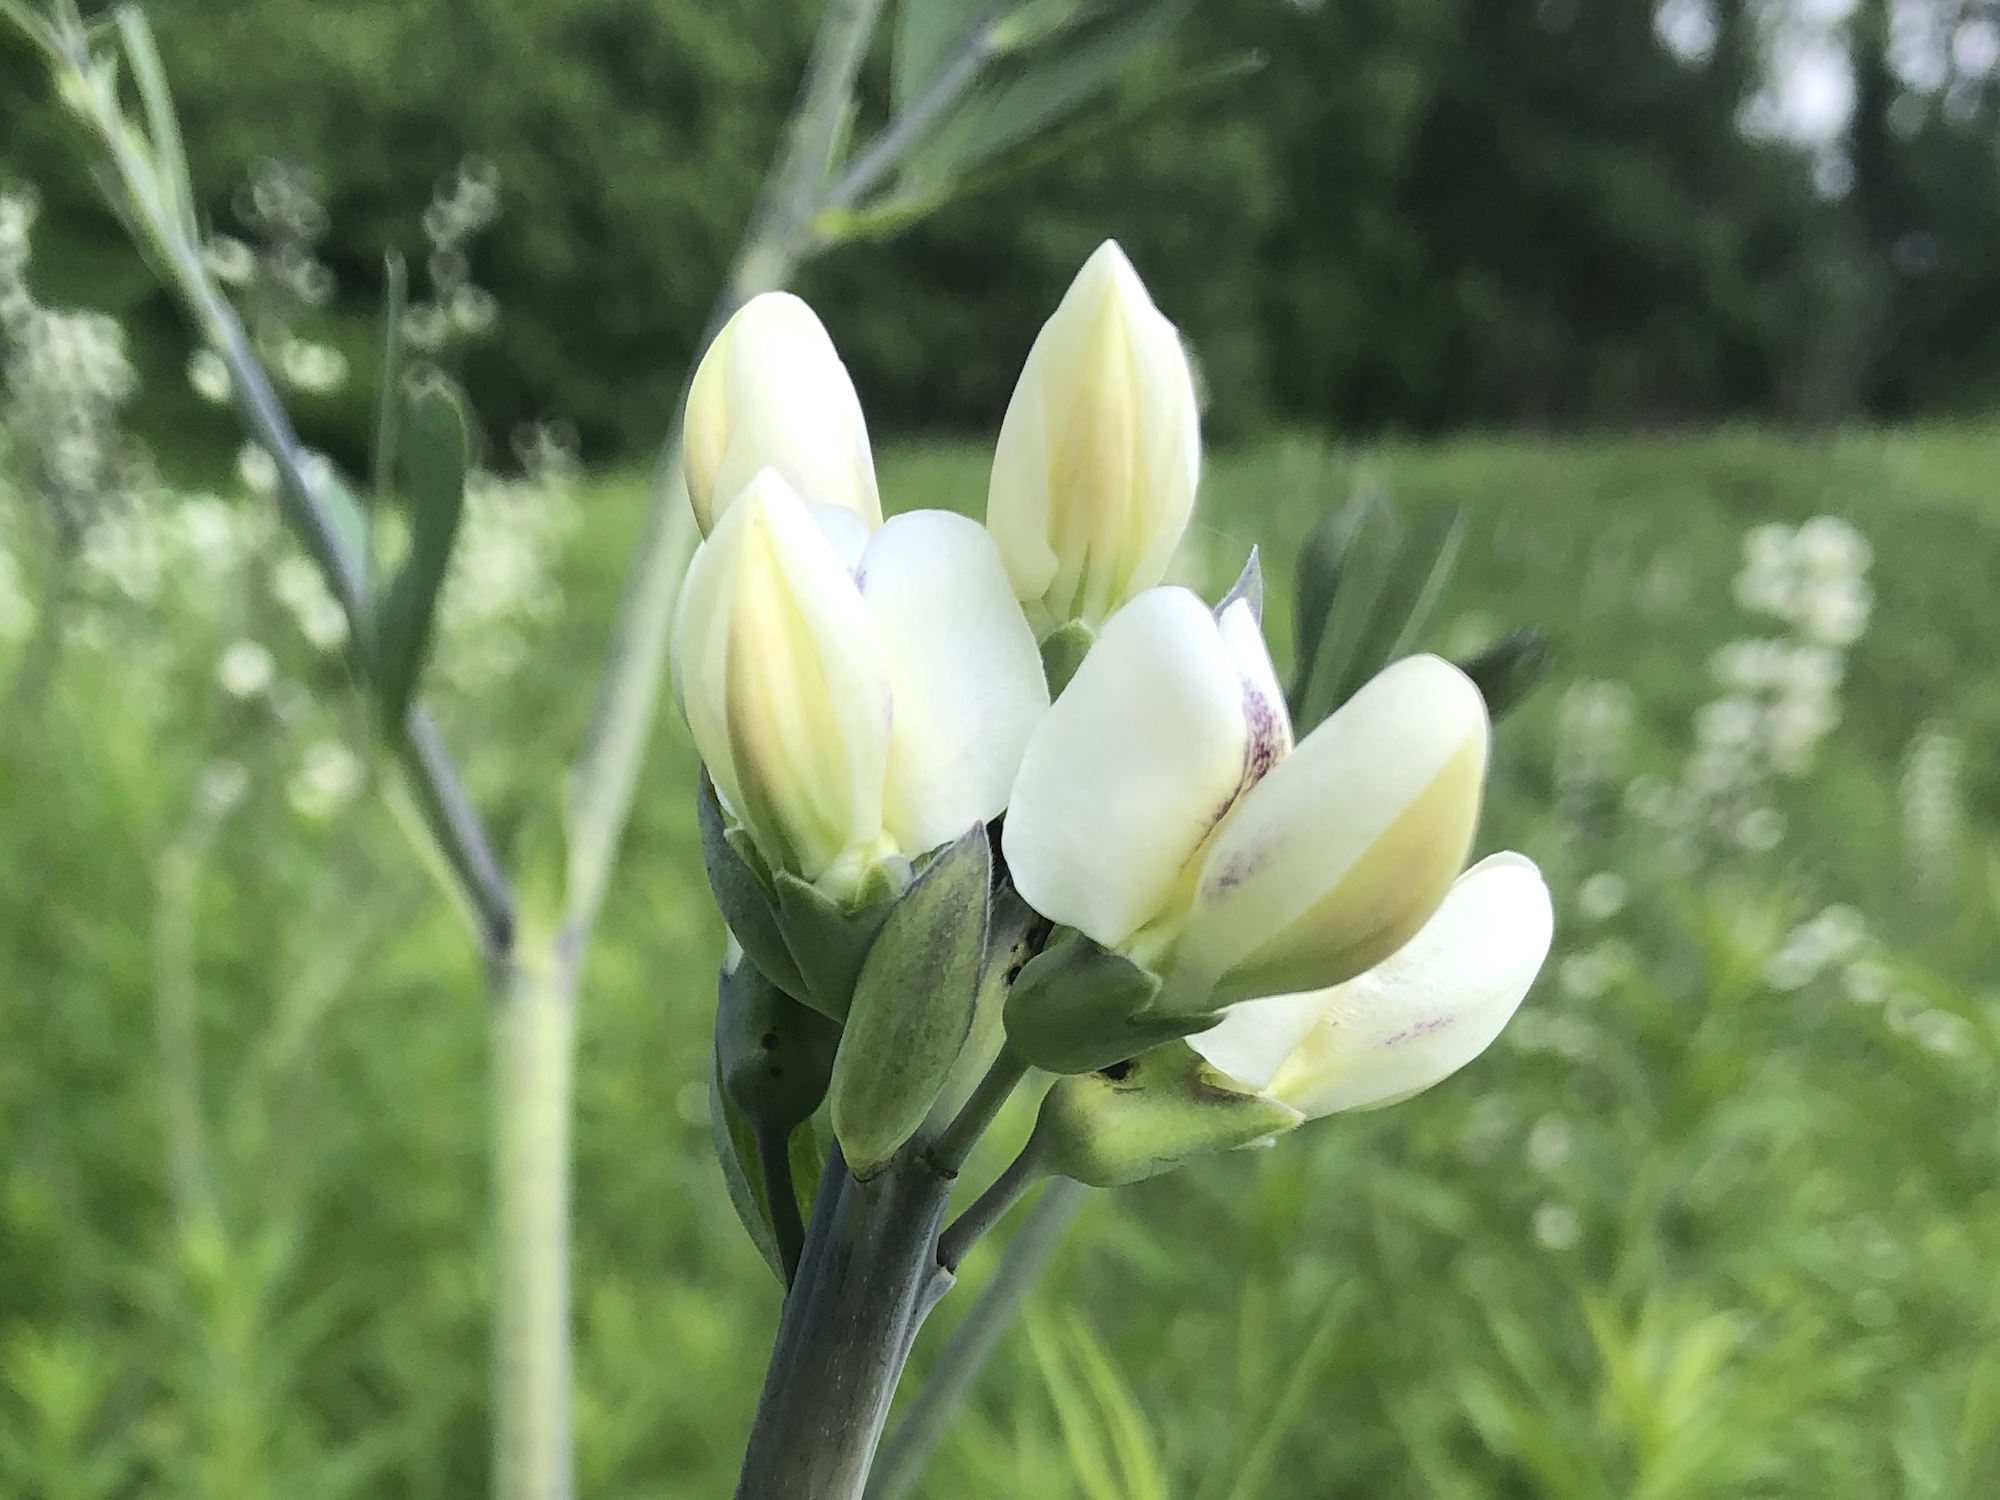 White Wild Indigo on the banks of the retaining pond on the corner of Nakoma Road and Manitou Way on June 17, 2019.